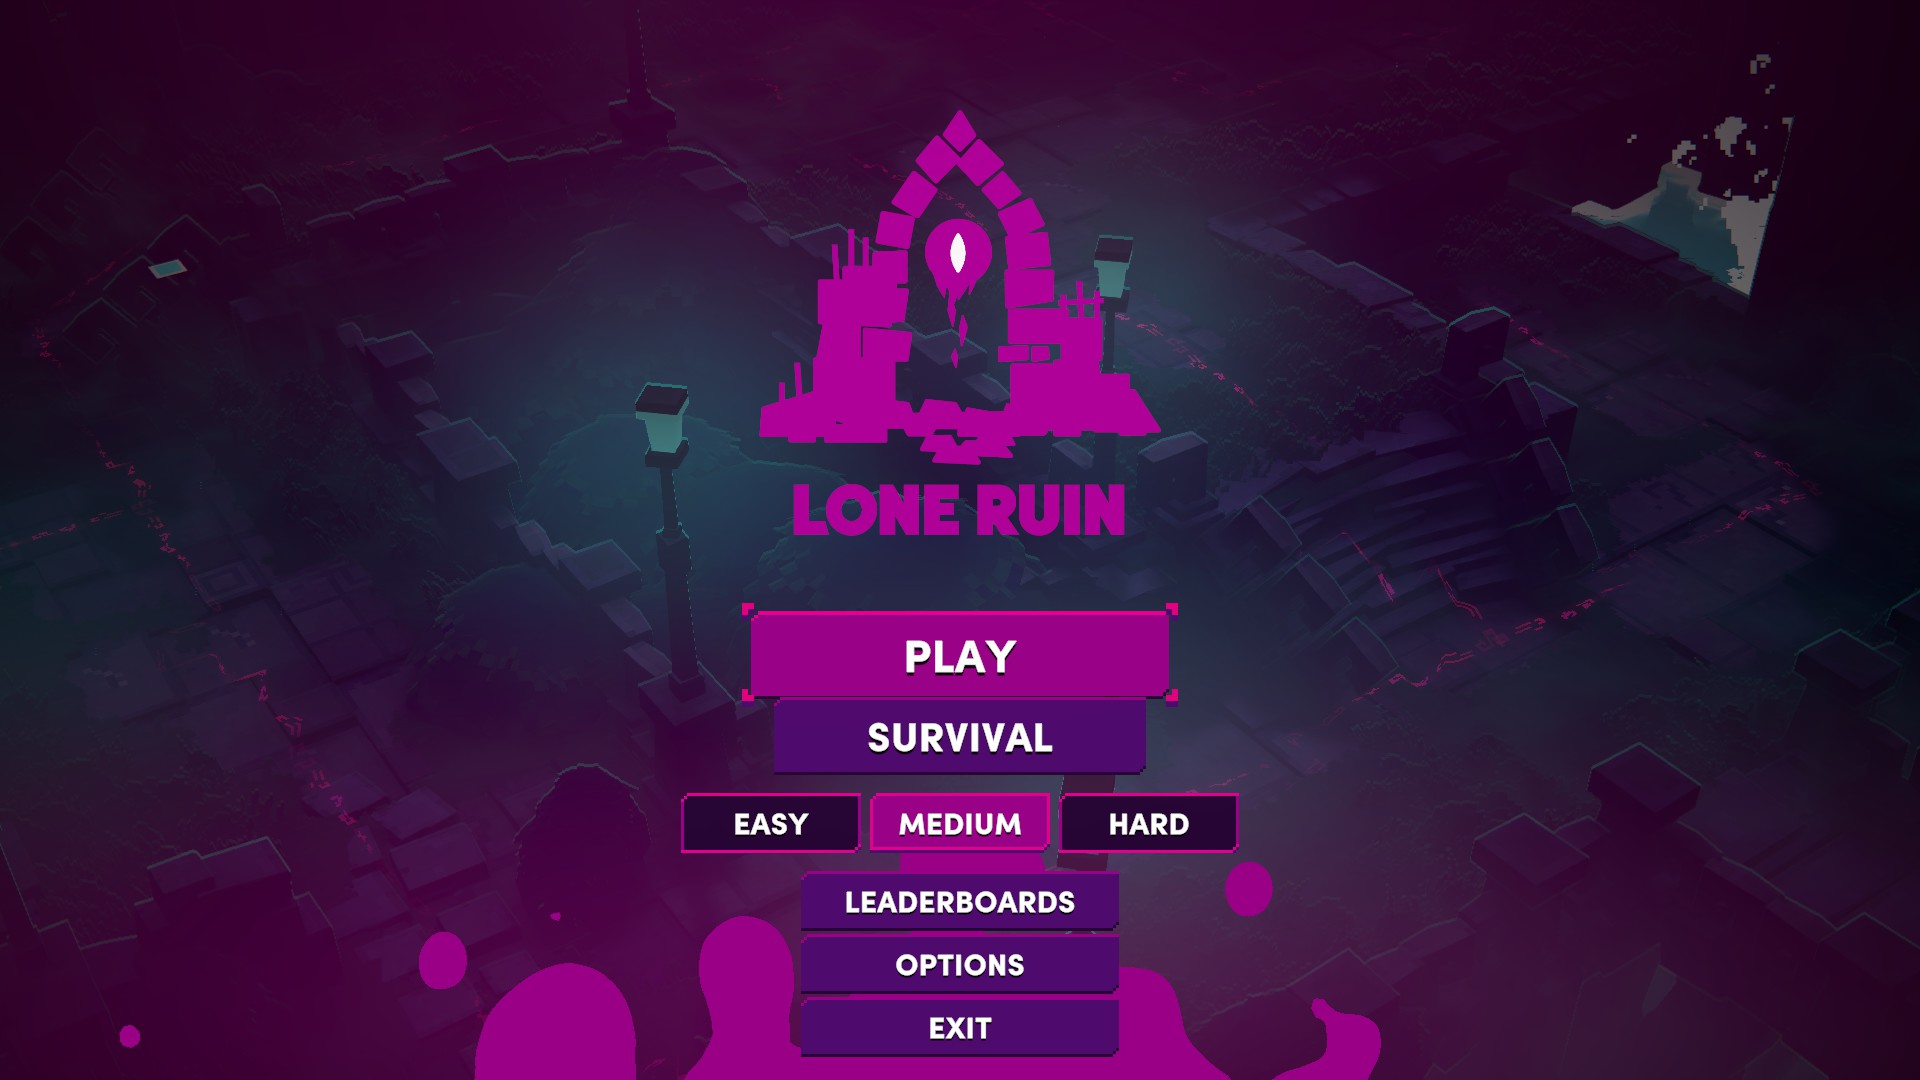 Image shows lone ruin title screen, options include Play, Survival followed by easy medium and hard, then leaderboards, options and exit